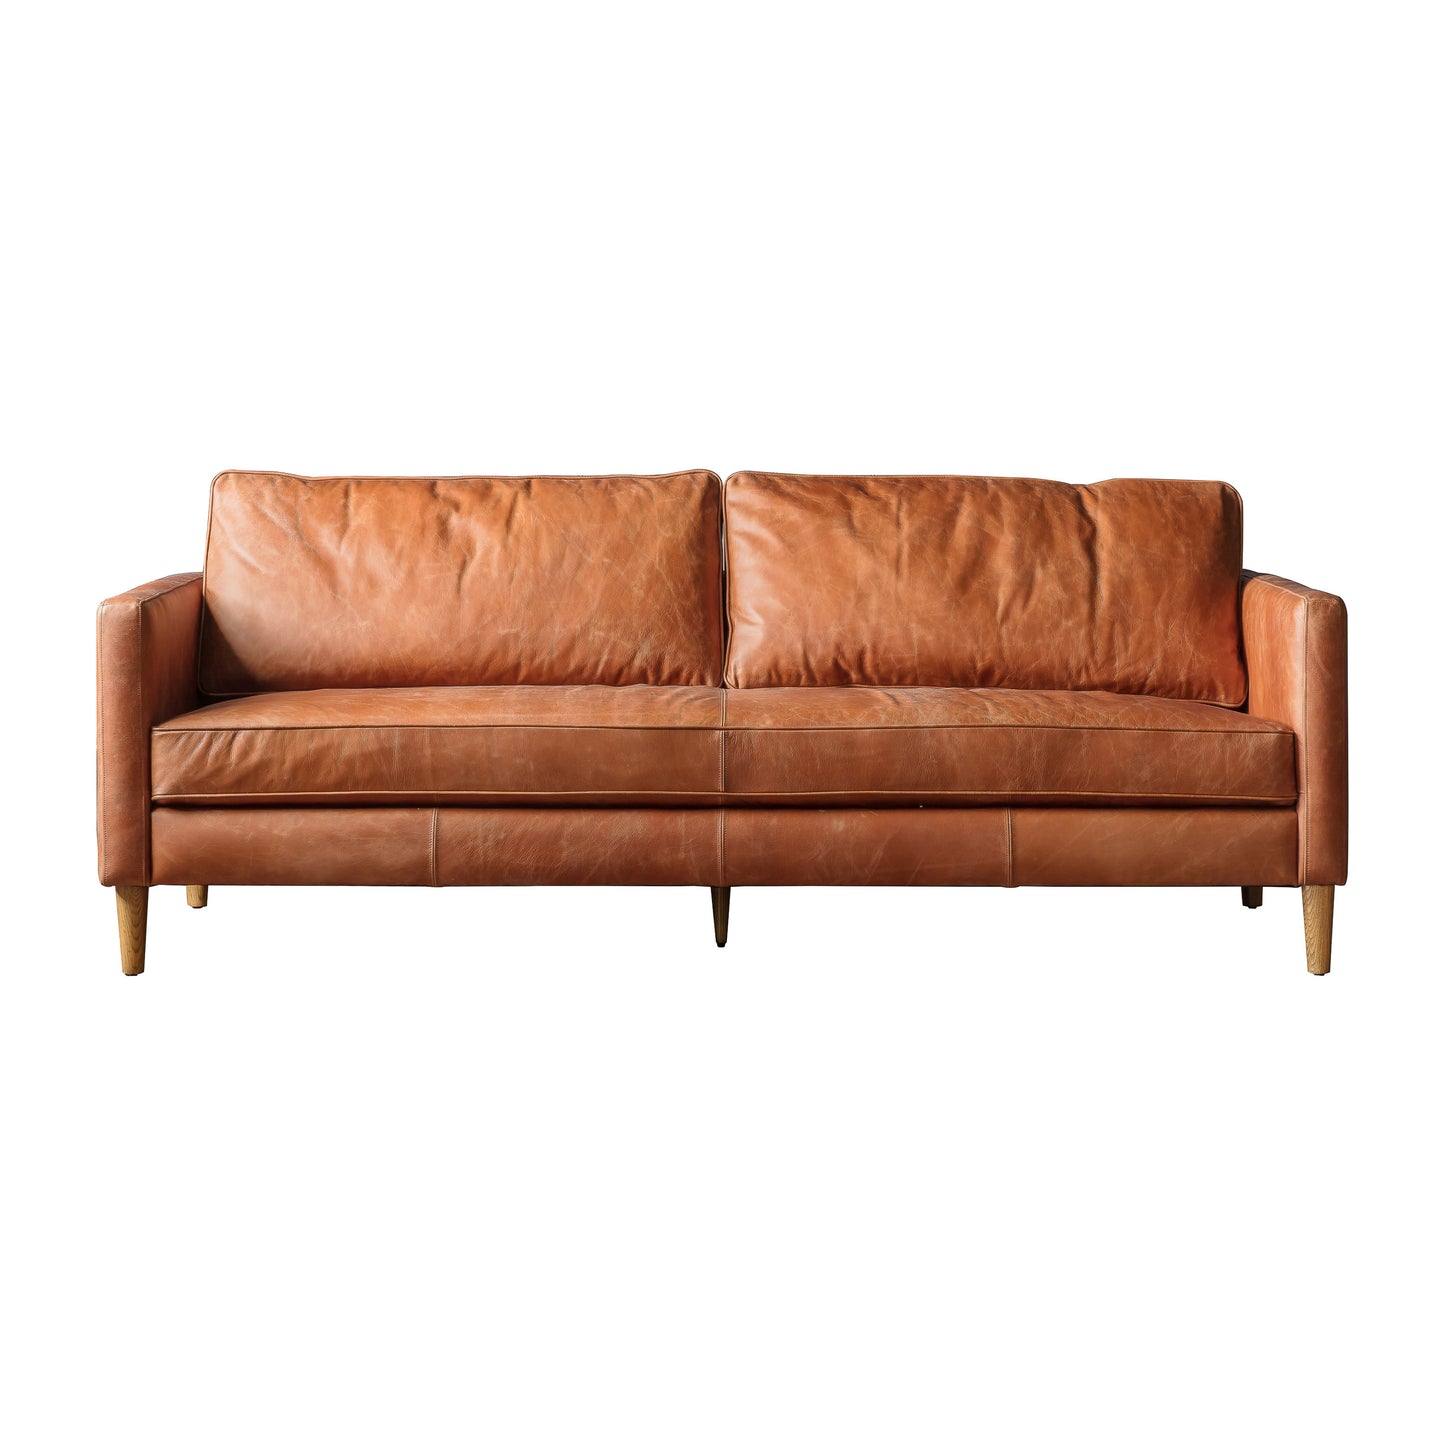 Vintage brown leather sofa on a white background for interior decor and home furniture.